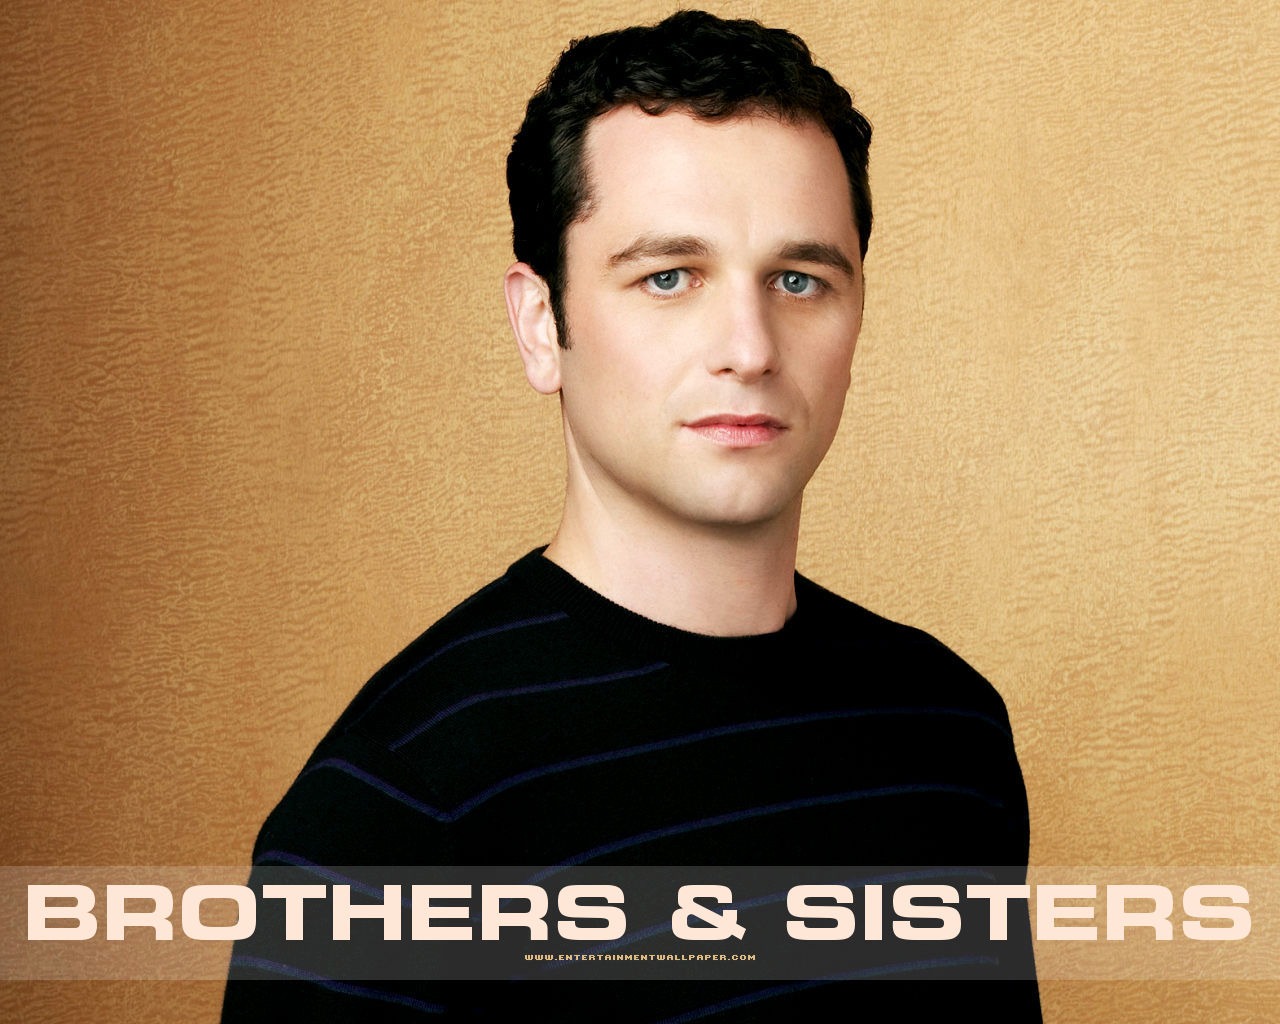 Brothers & Sisters wallpaper #19 - 1280x1024